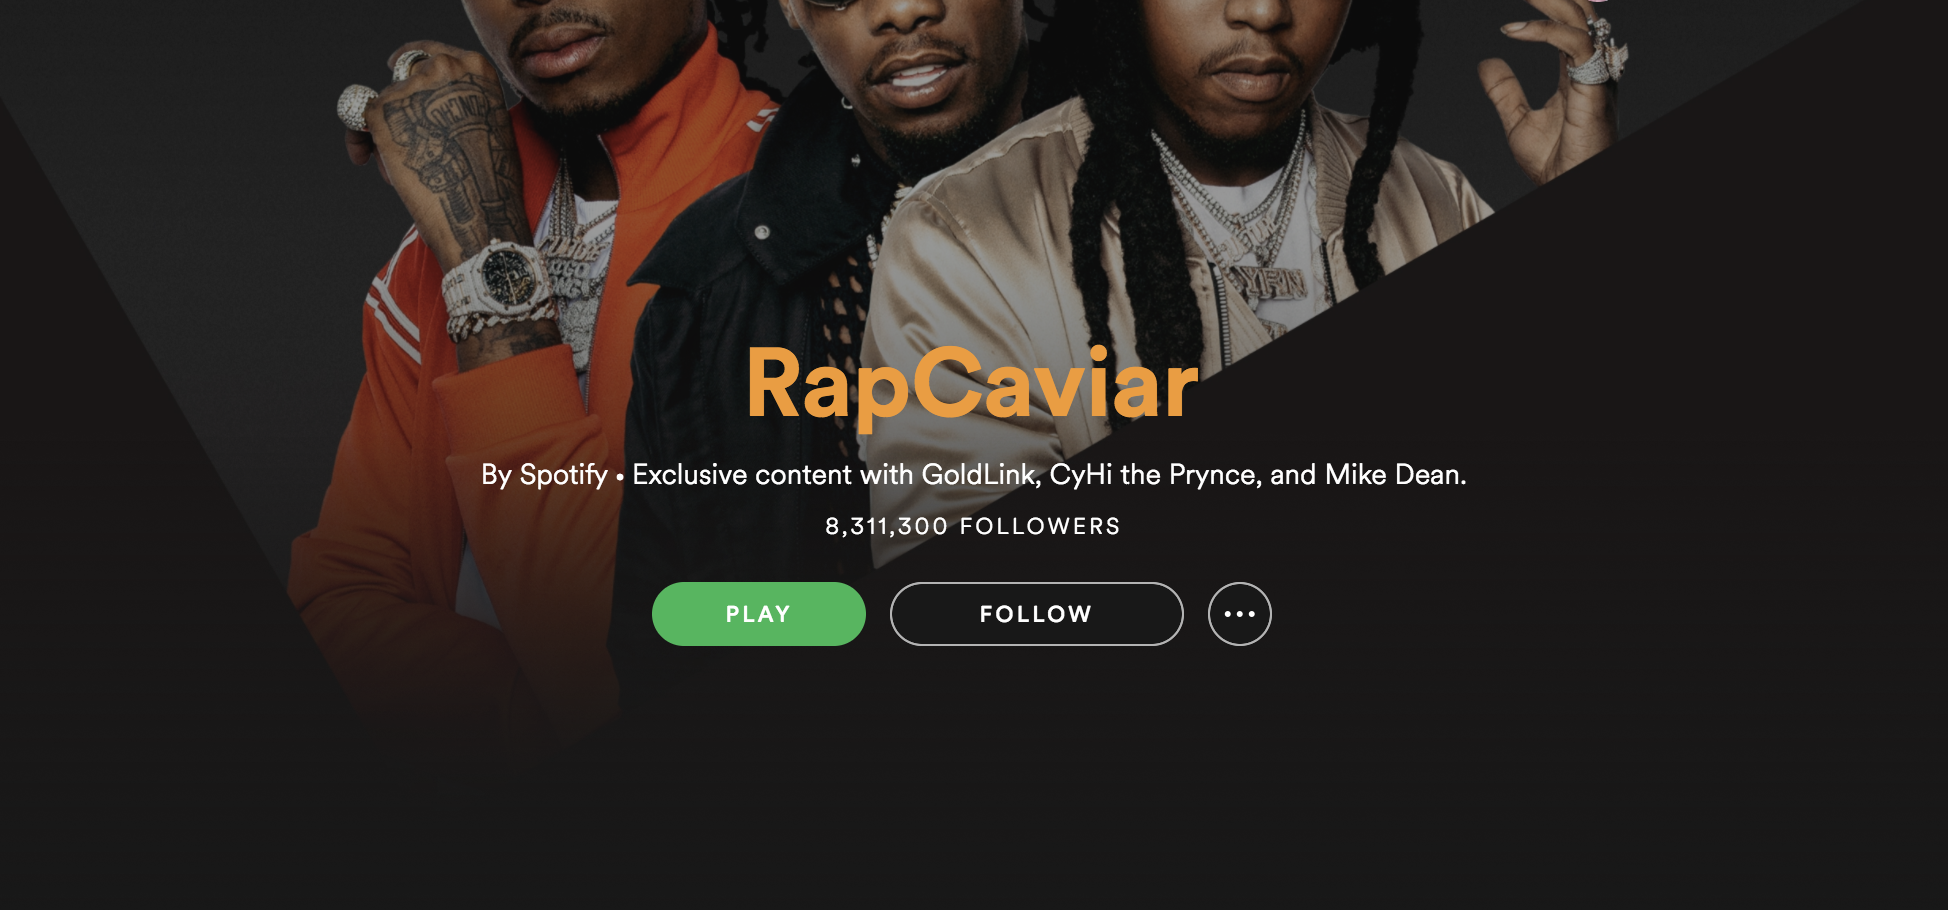 What You Need to Know: RapCaviar, Spotify’s own HOT 97